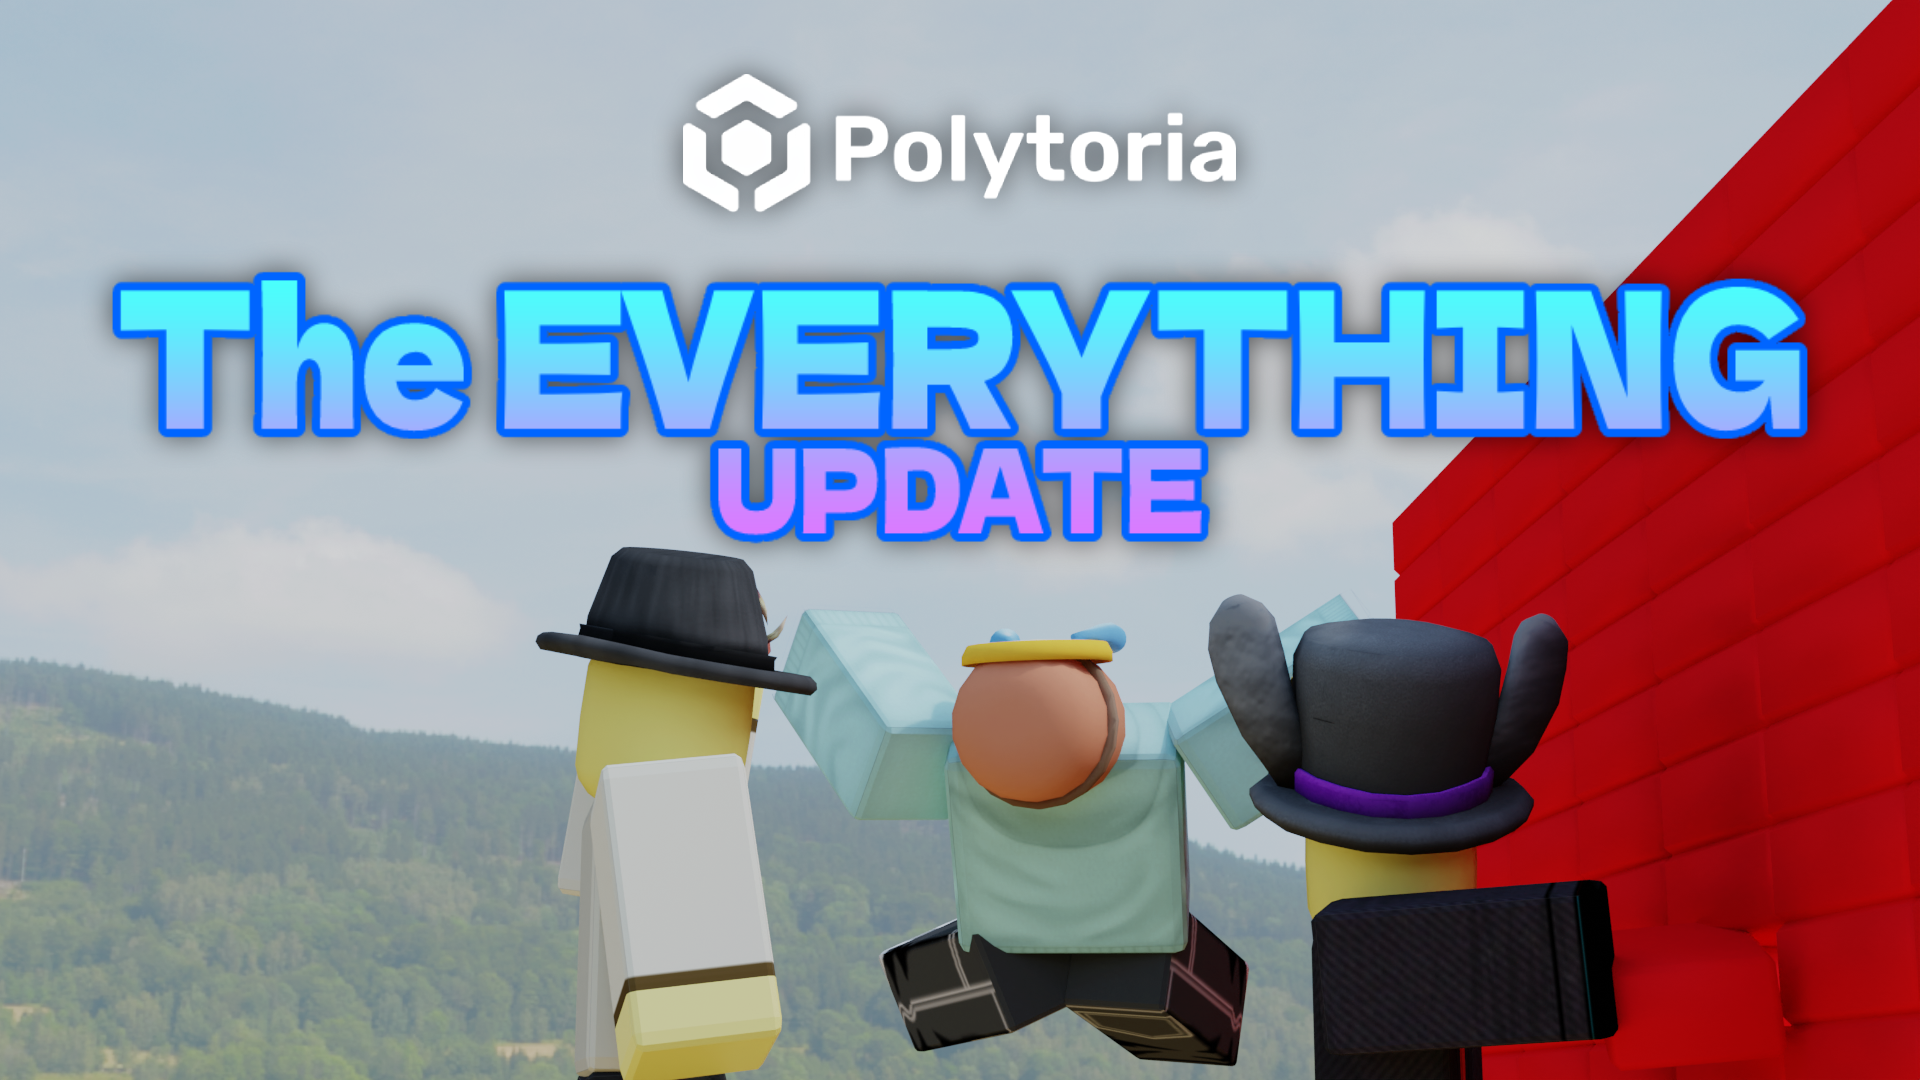 Introducing The EVERYTHING UPDATE!